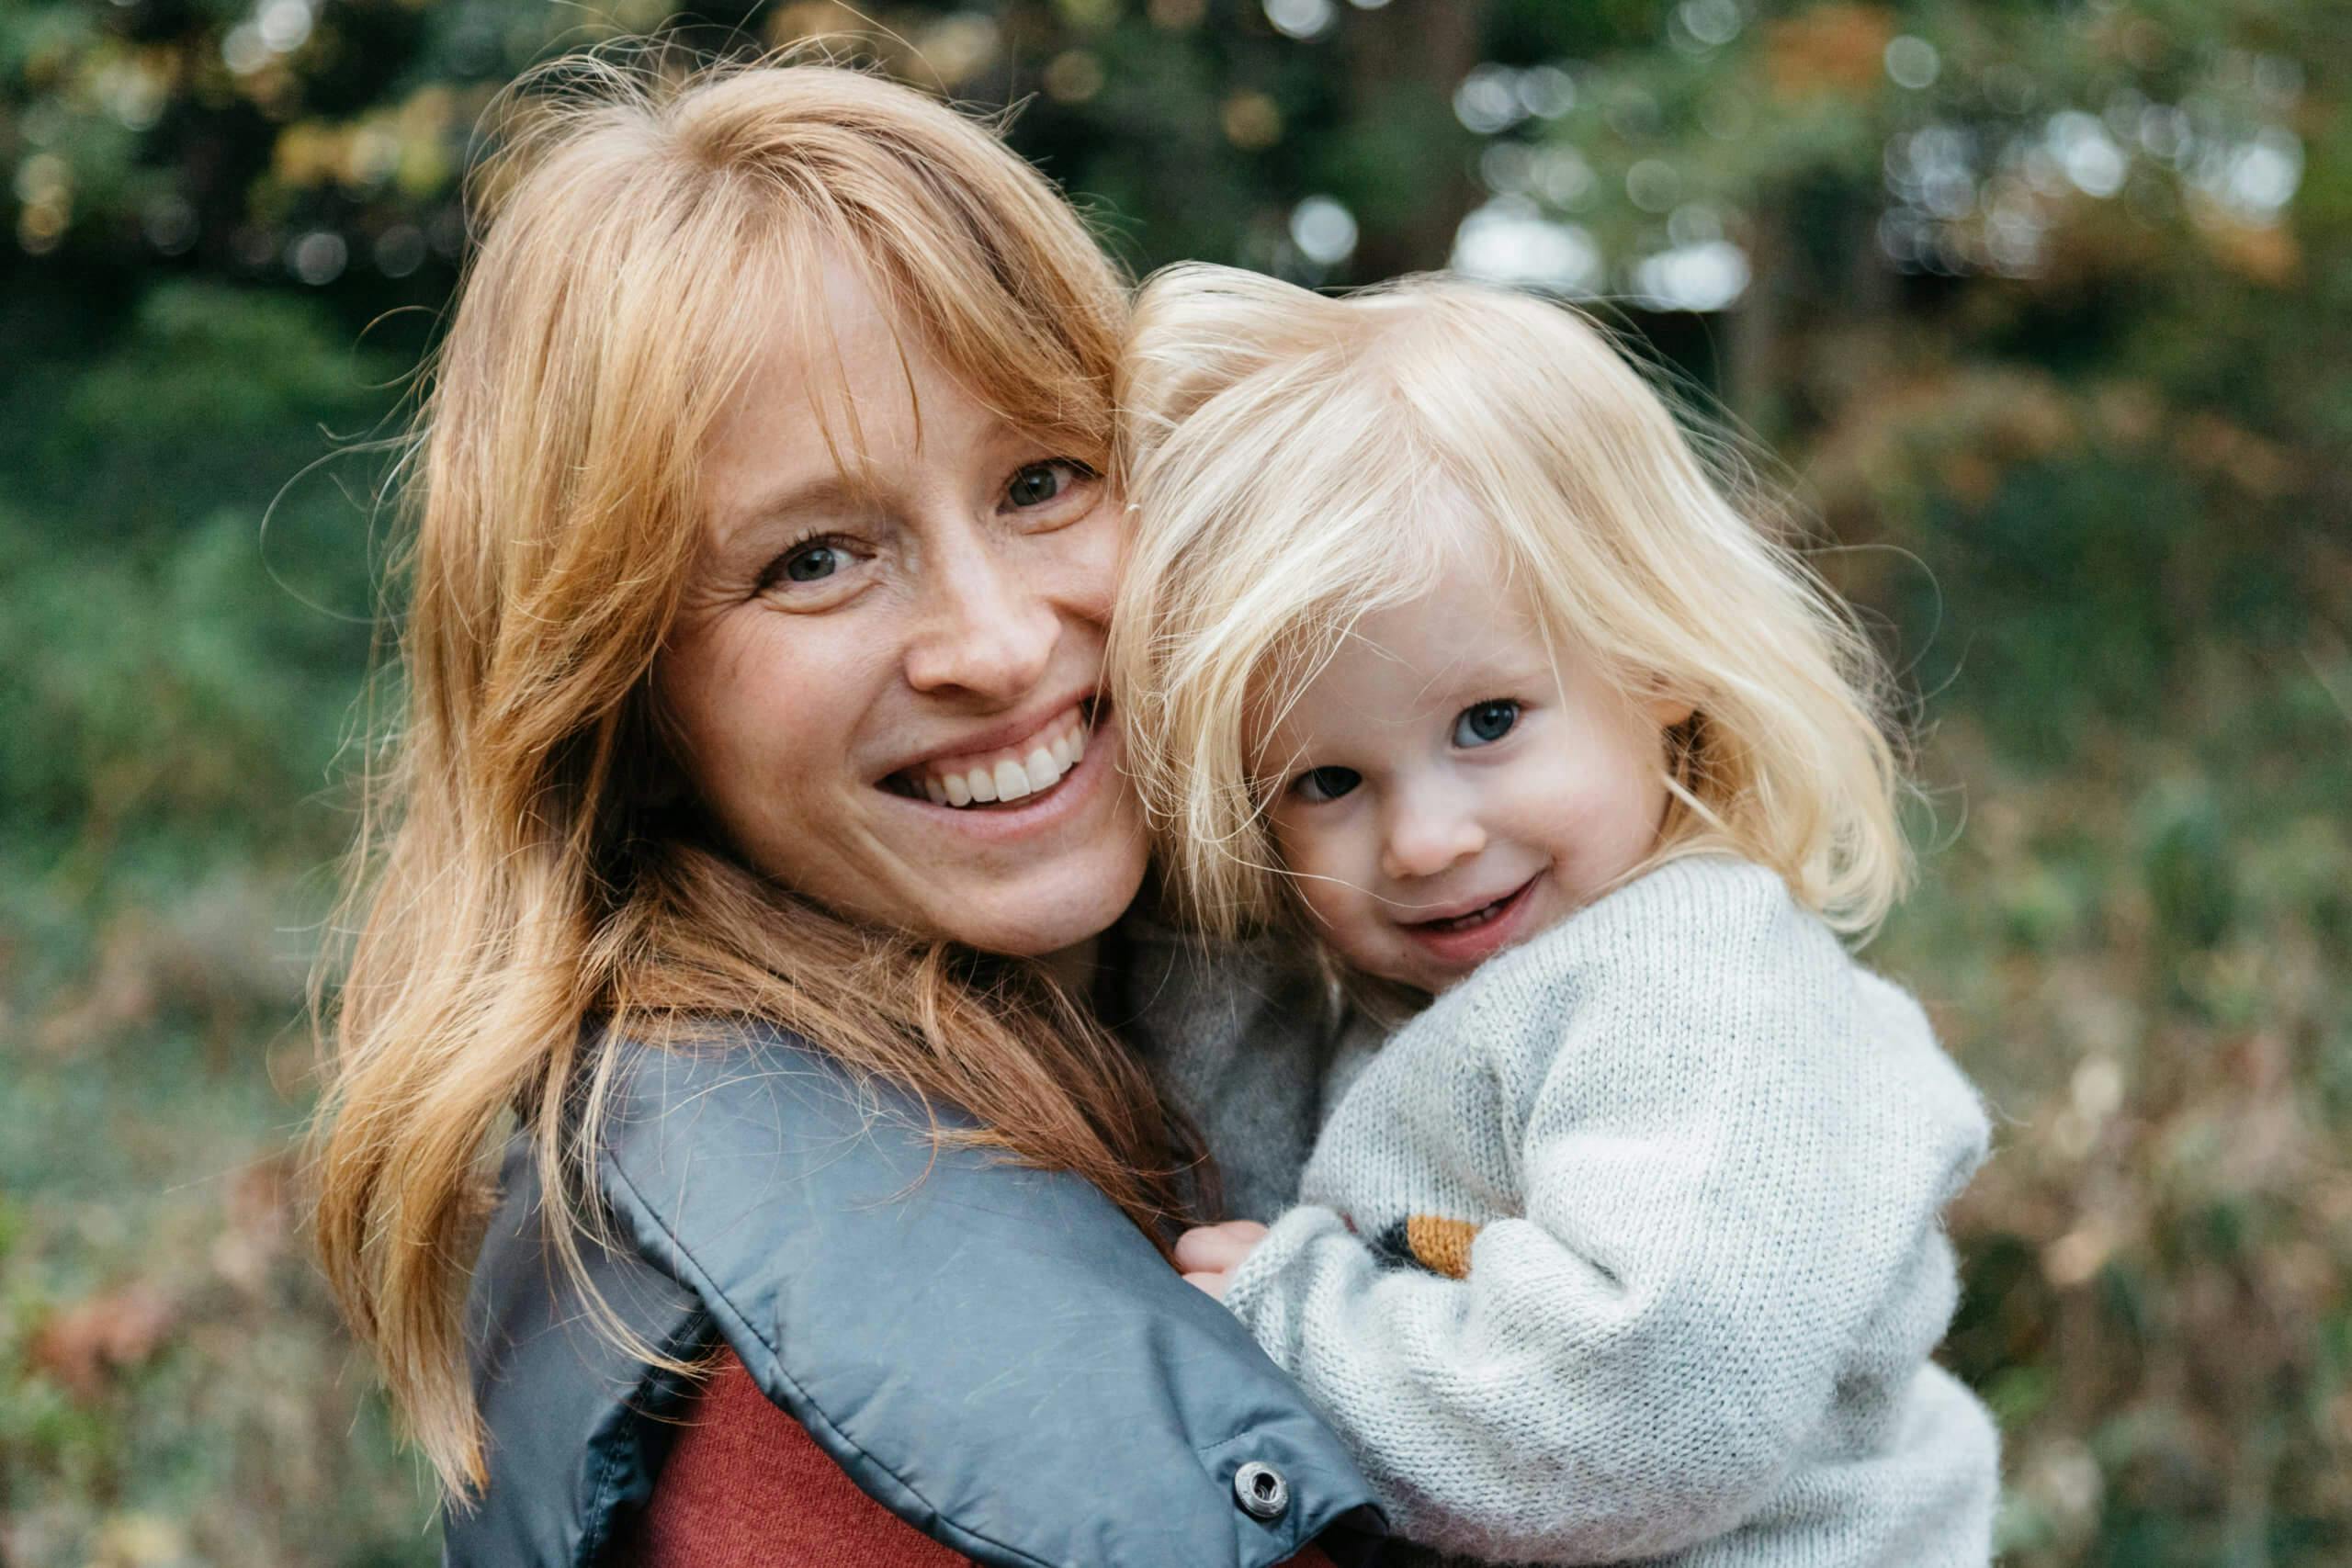 Smiling woman holding a young blonde child in a nature setting